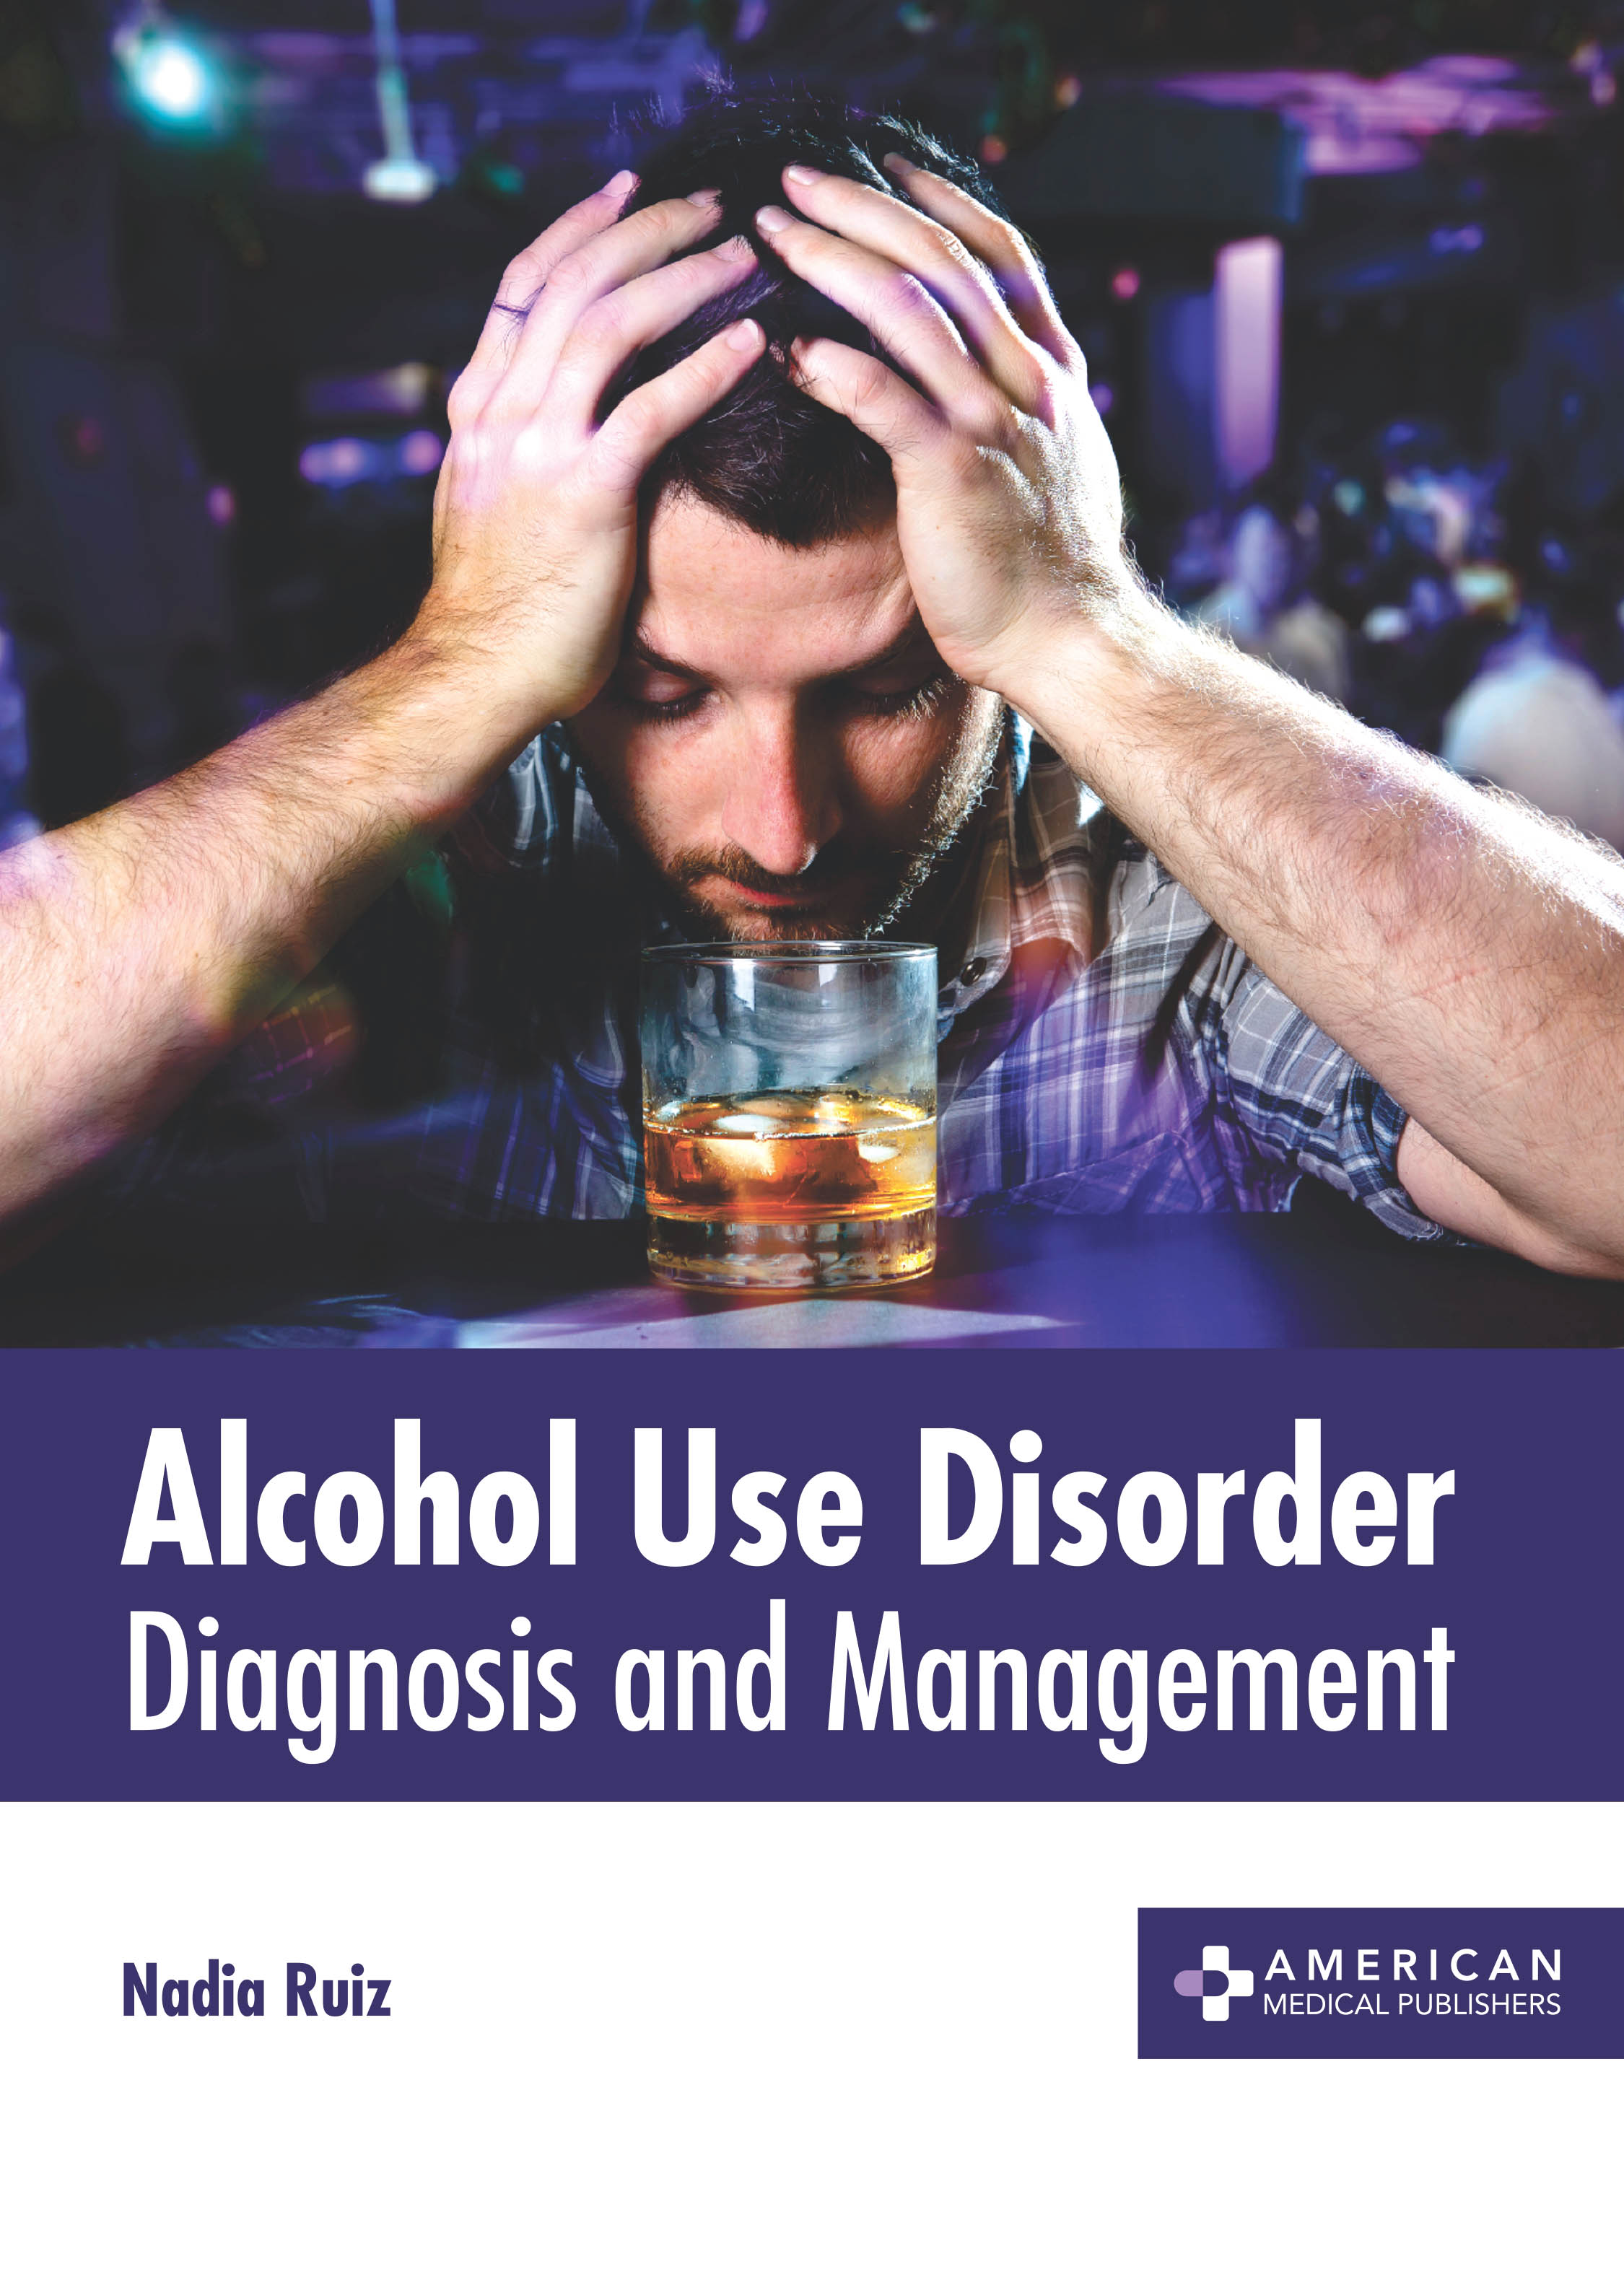 ALCOHOL USE DISORDER: DIAGNOSIS AND MANAGEMENT- ISBN: 9781639270880